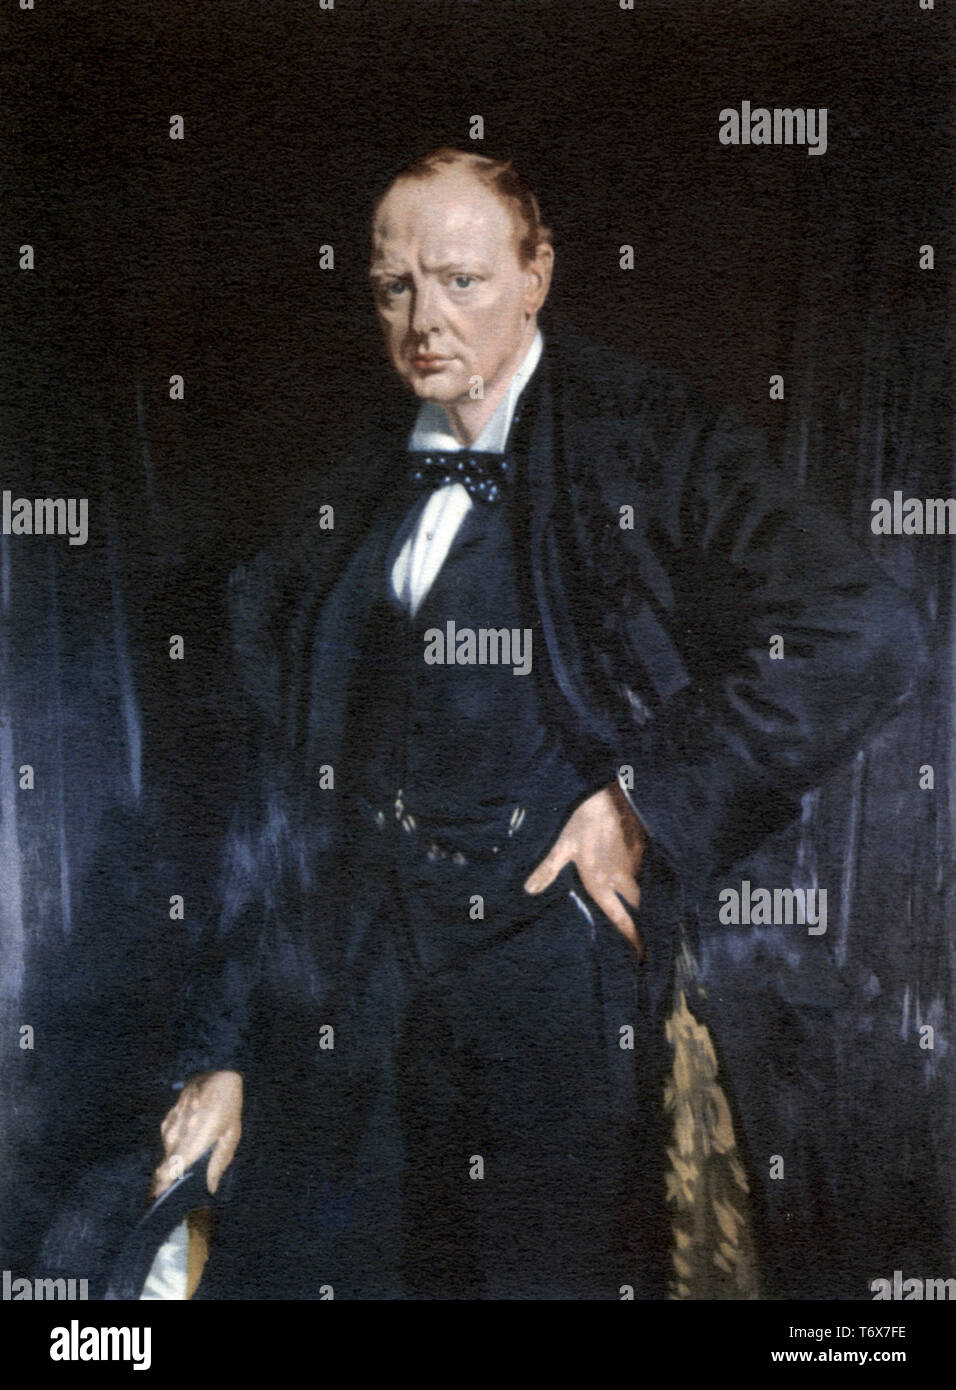 Winston Churchill, 1916. By Sir William Orpen (1878-1931). Sir Winston Leonard Spencer-Churchill (1874-1965), British politician, army officer, and writer. Churchill was Prime Minister of the United Kingdom from 1940 to 1945, when he led Britain to victory in the Second World War, and again from 1951 to 1955. Stock Photo